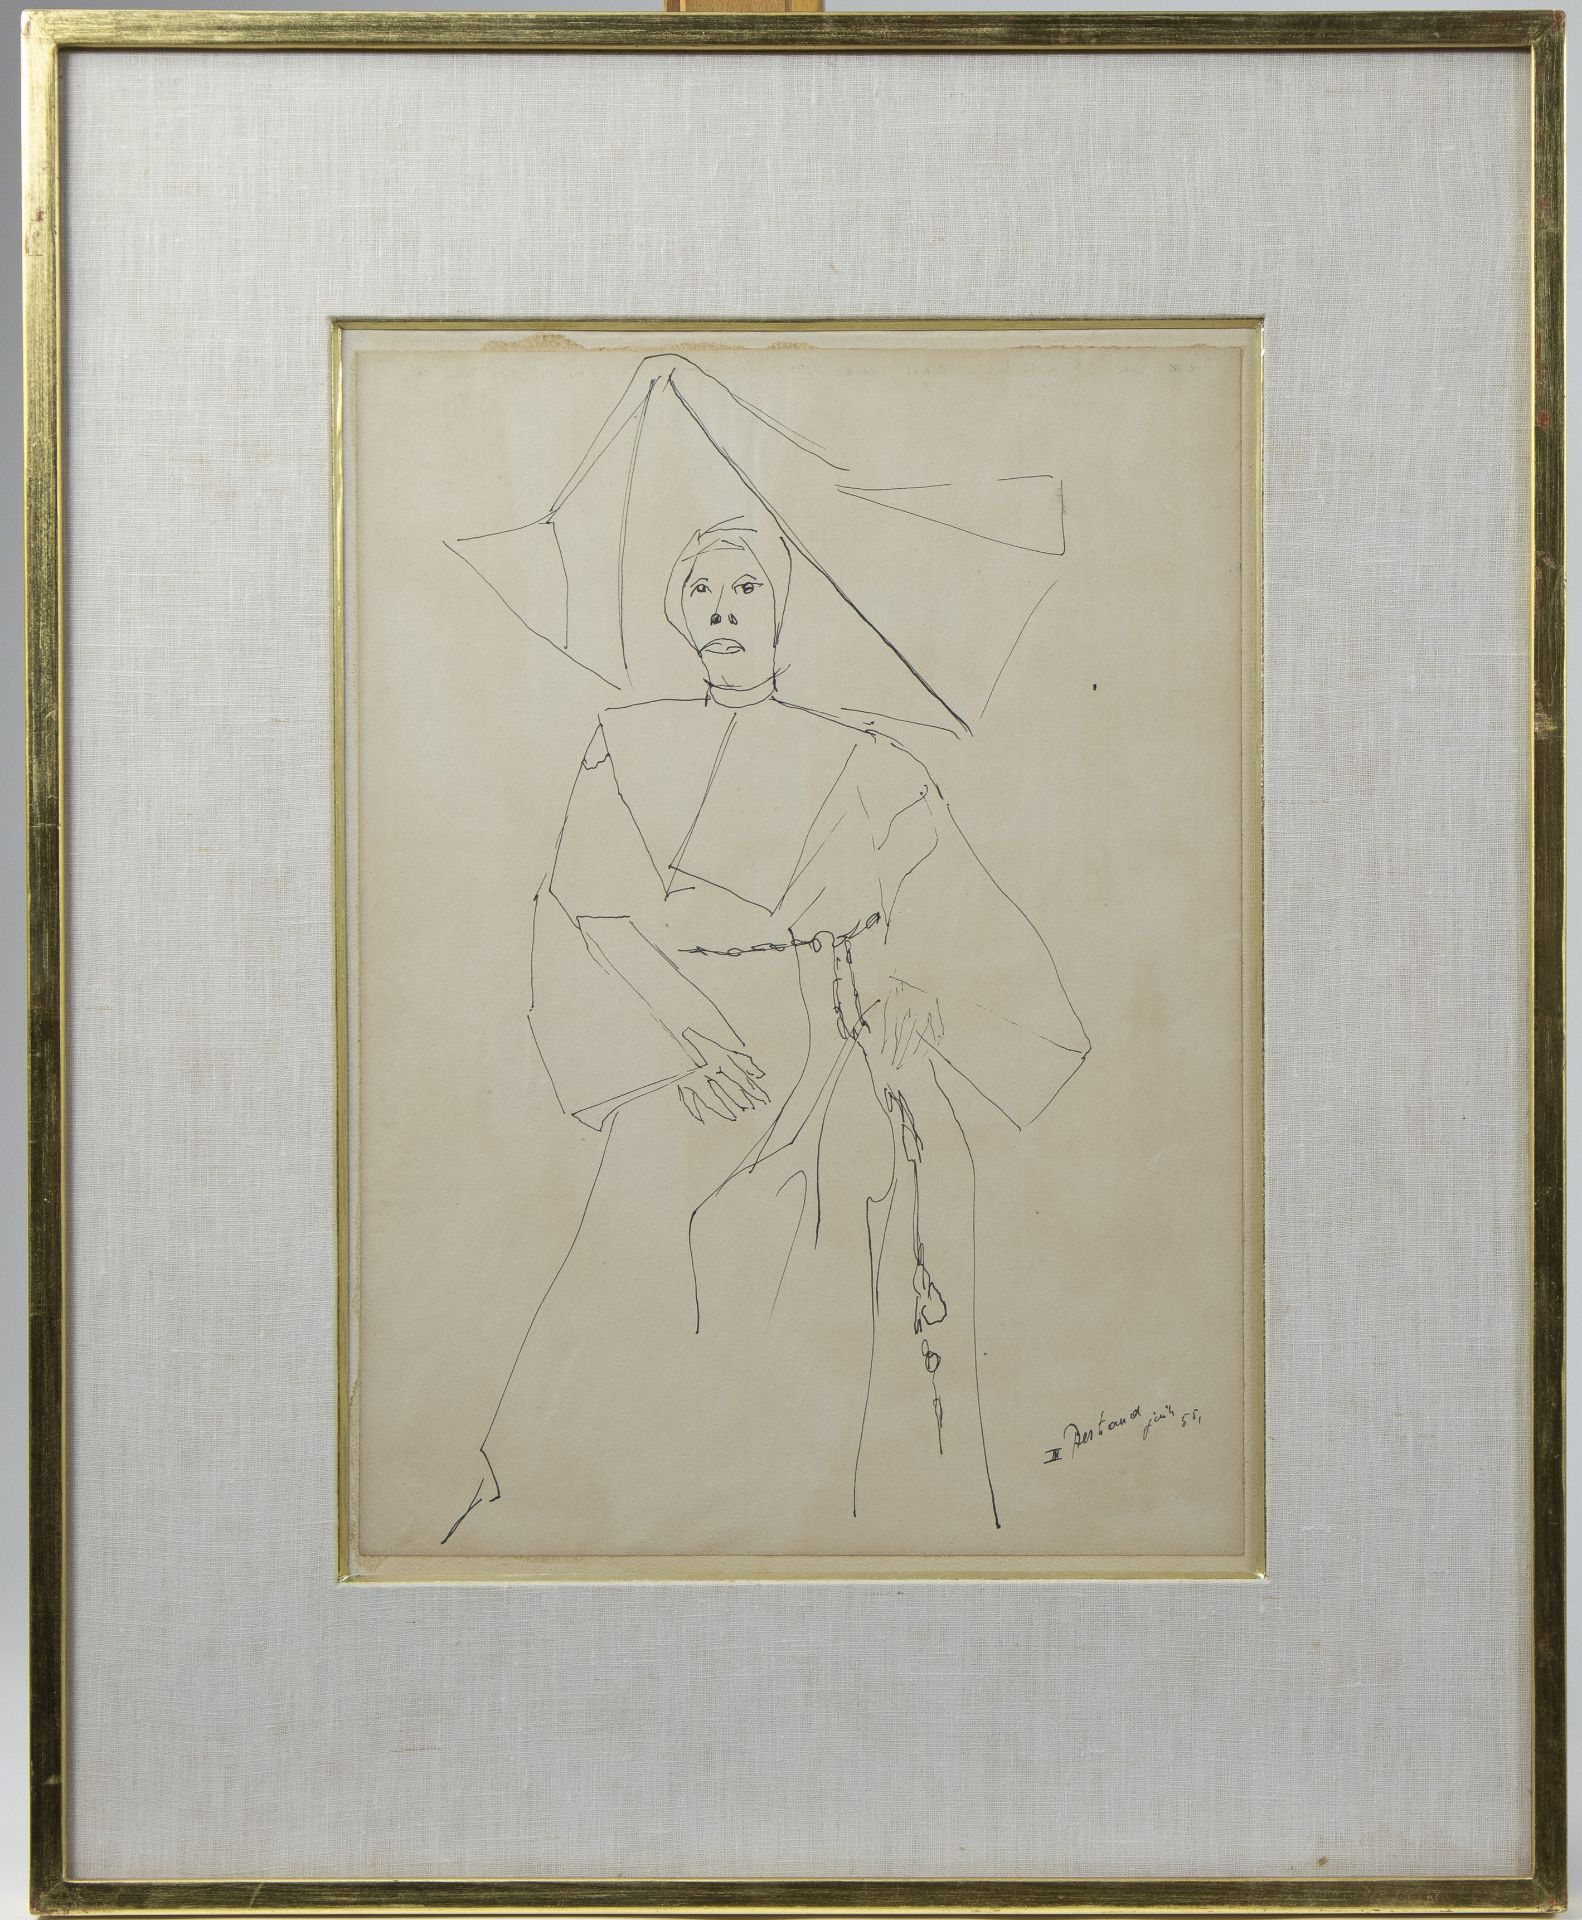 Gaston BERTRAND (1910-1994), ink drawing Merry Nun, signed and dated '55 - Image 2 of 4